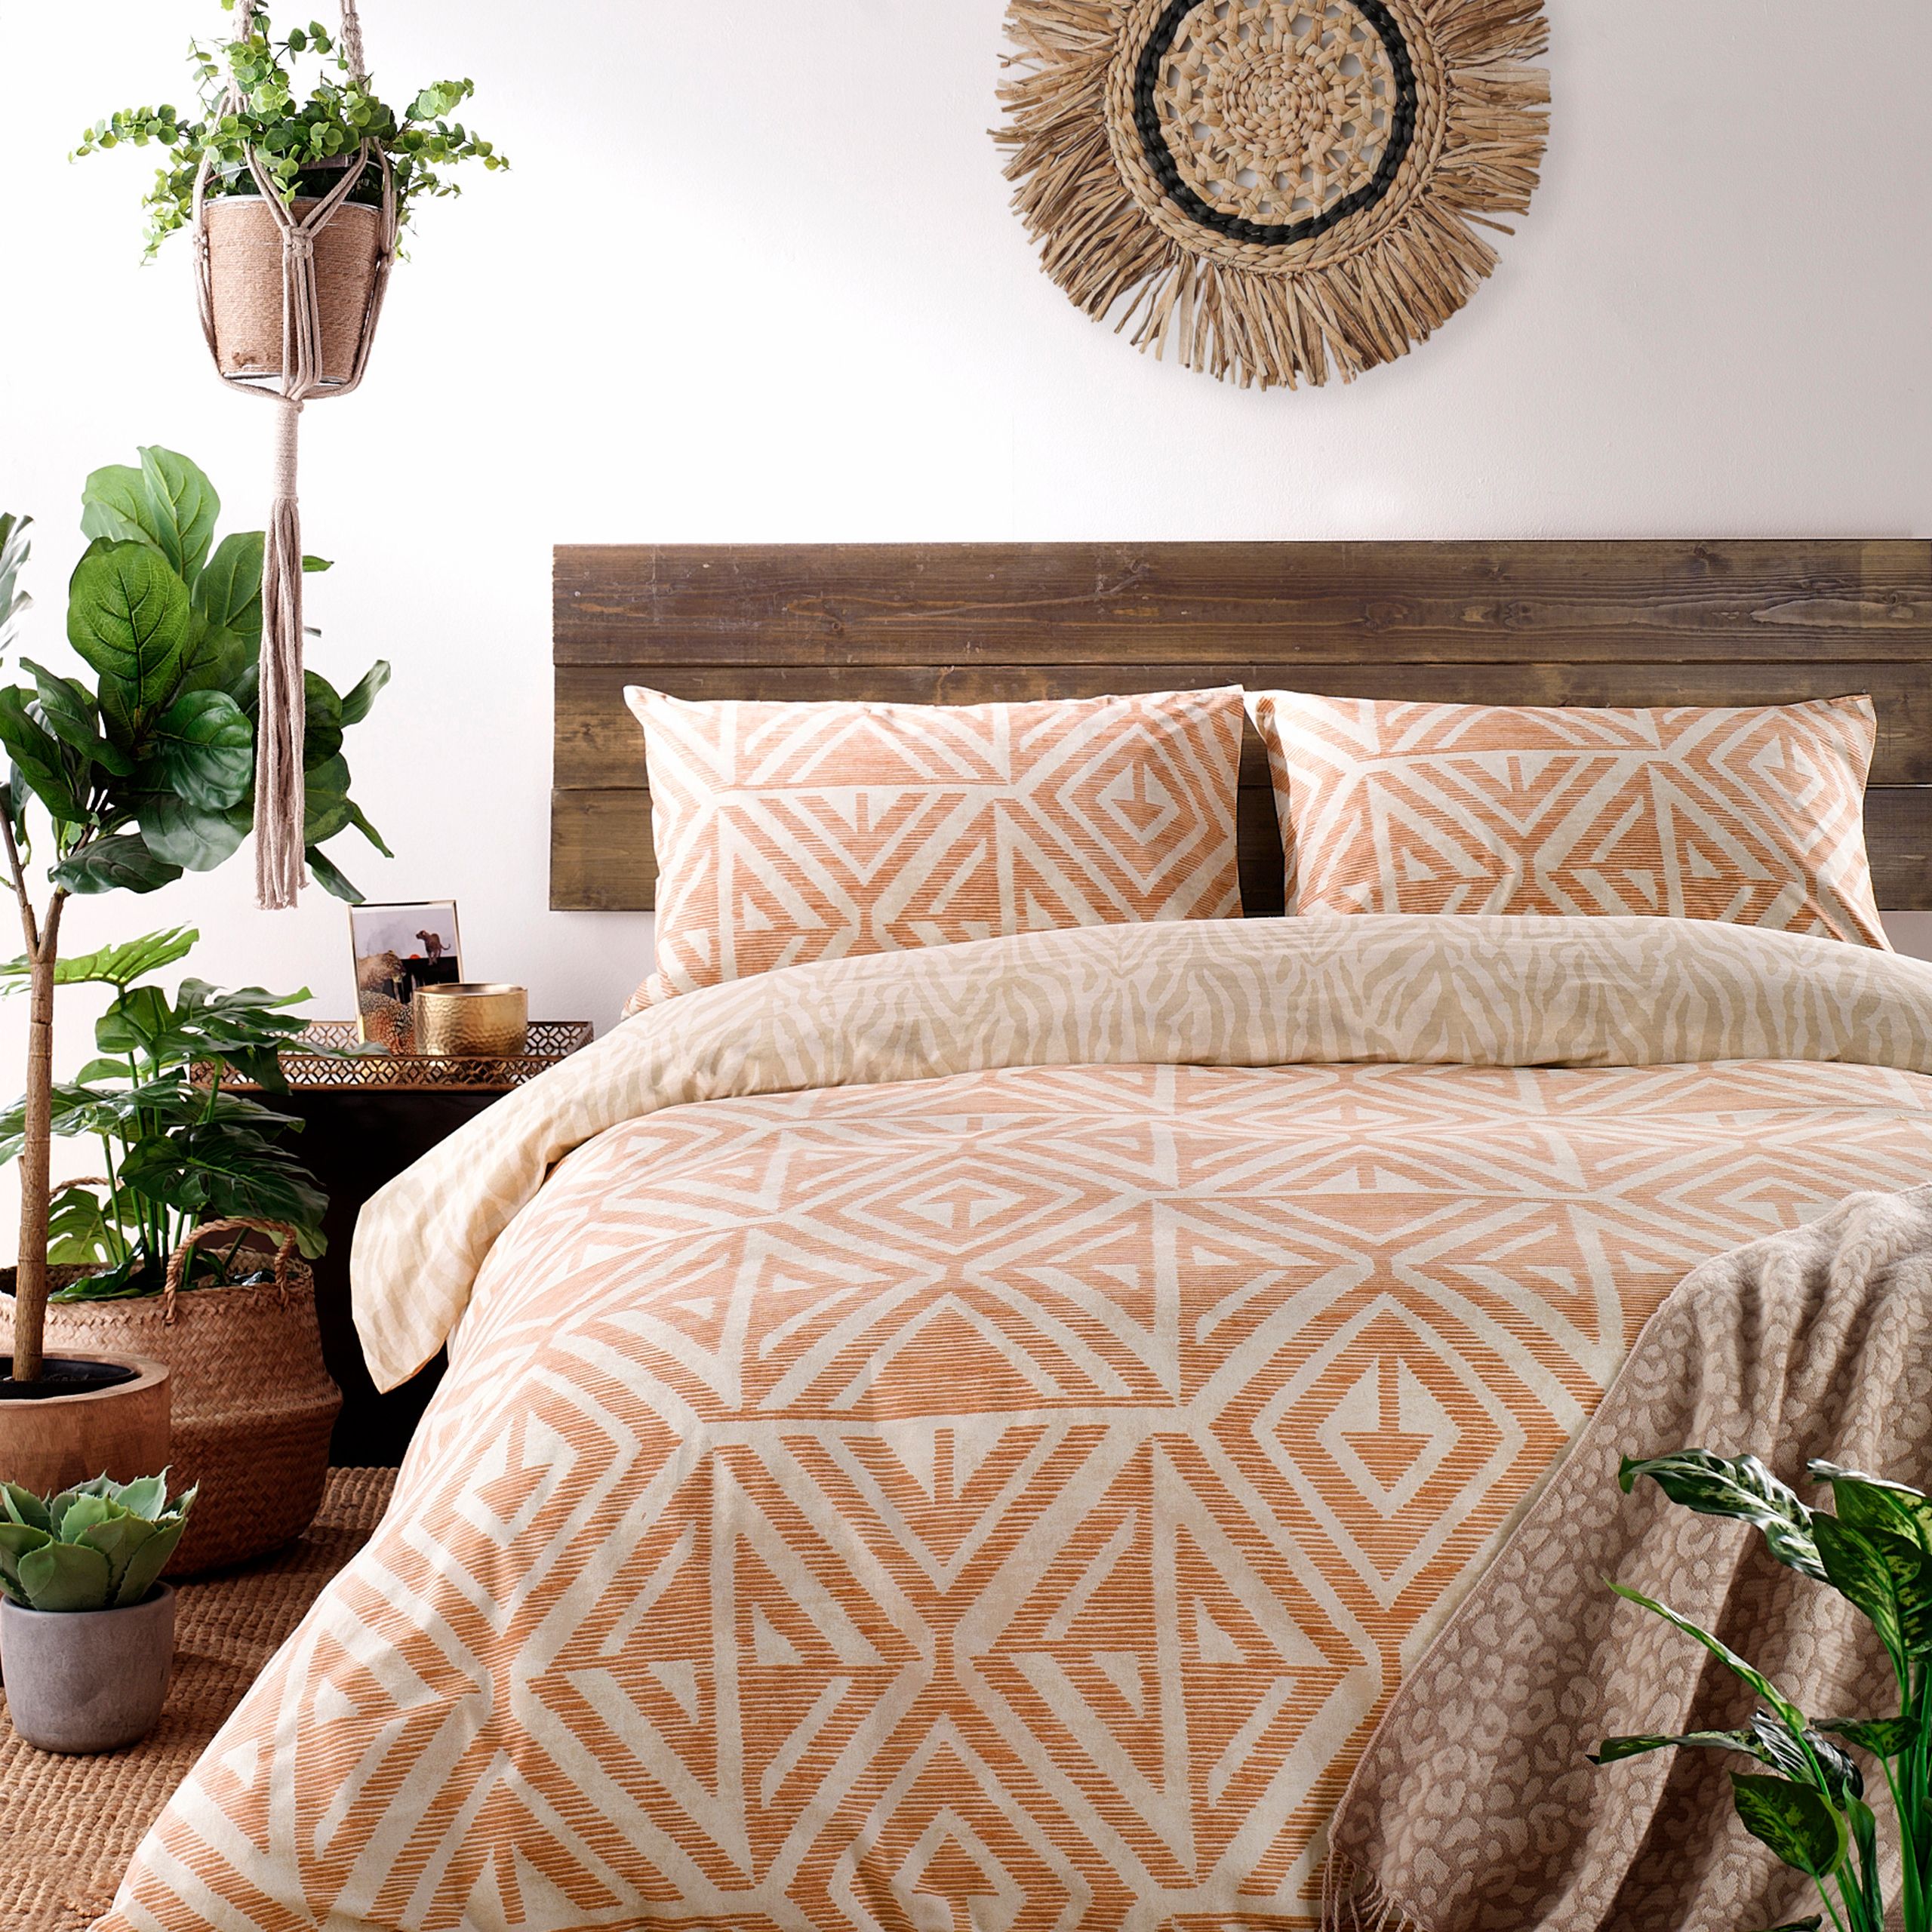 A soft, global-inspired geometric print duvet set and pillow cases - perfect for adding texture and warmth to your bedroom. Featuring a tonal animal print reverse print, for a softer alternative when you need it.